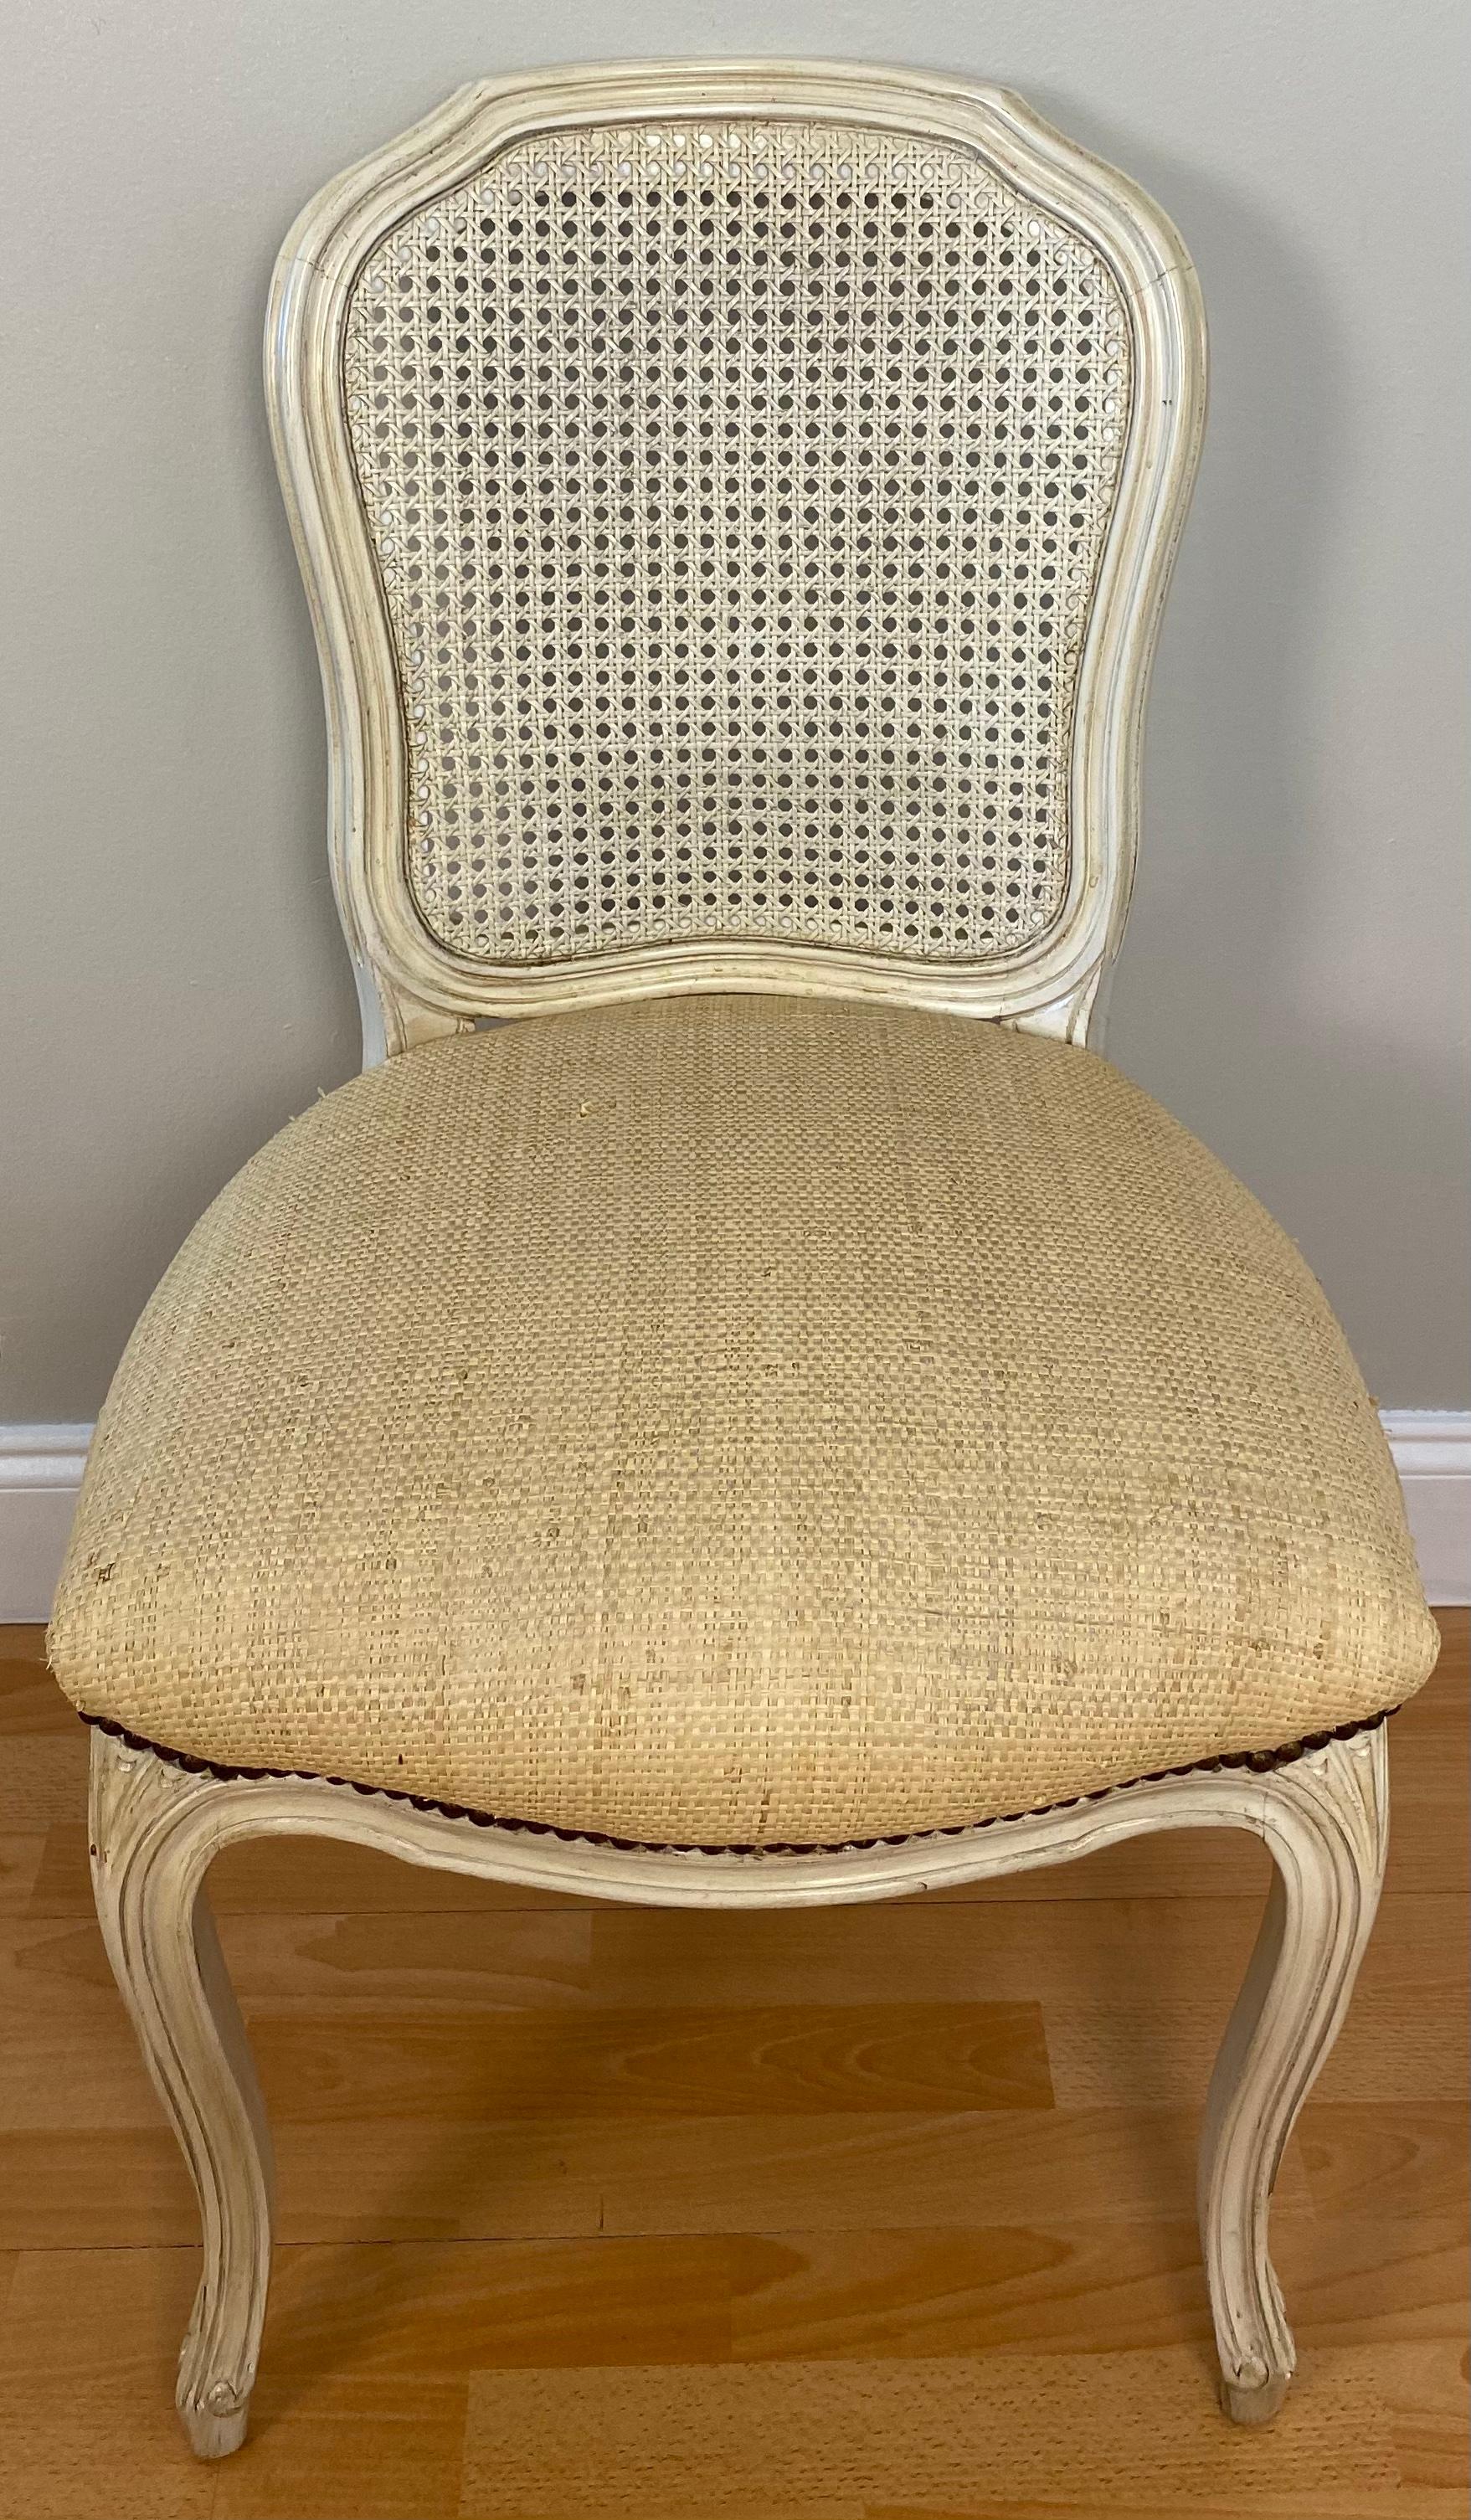 A very good quality set of six caned comfortable and sturdy French Louis XV style dining chairs in a pleasing cream colored or beige finish. 

The well crafted wood frames are sturdy and comfortable enough for daily use. Caned back and upholstered